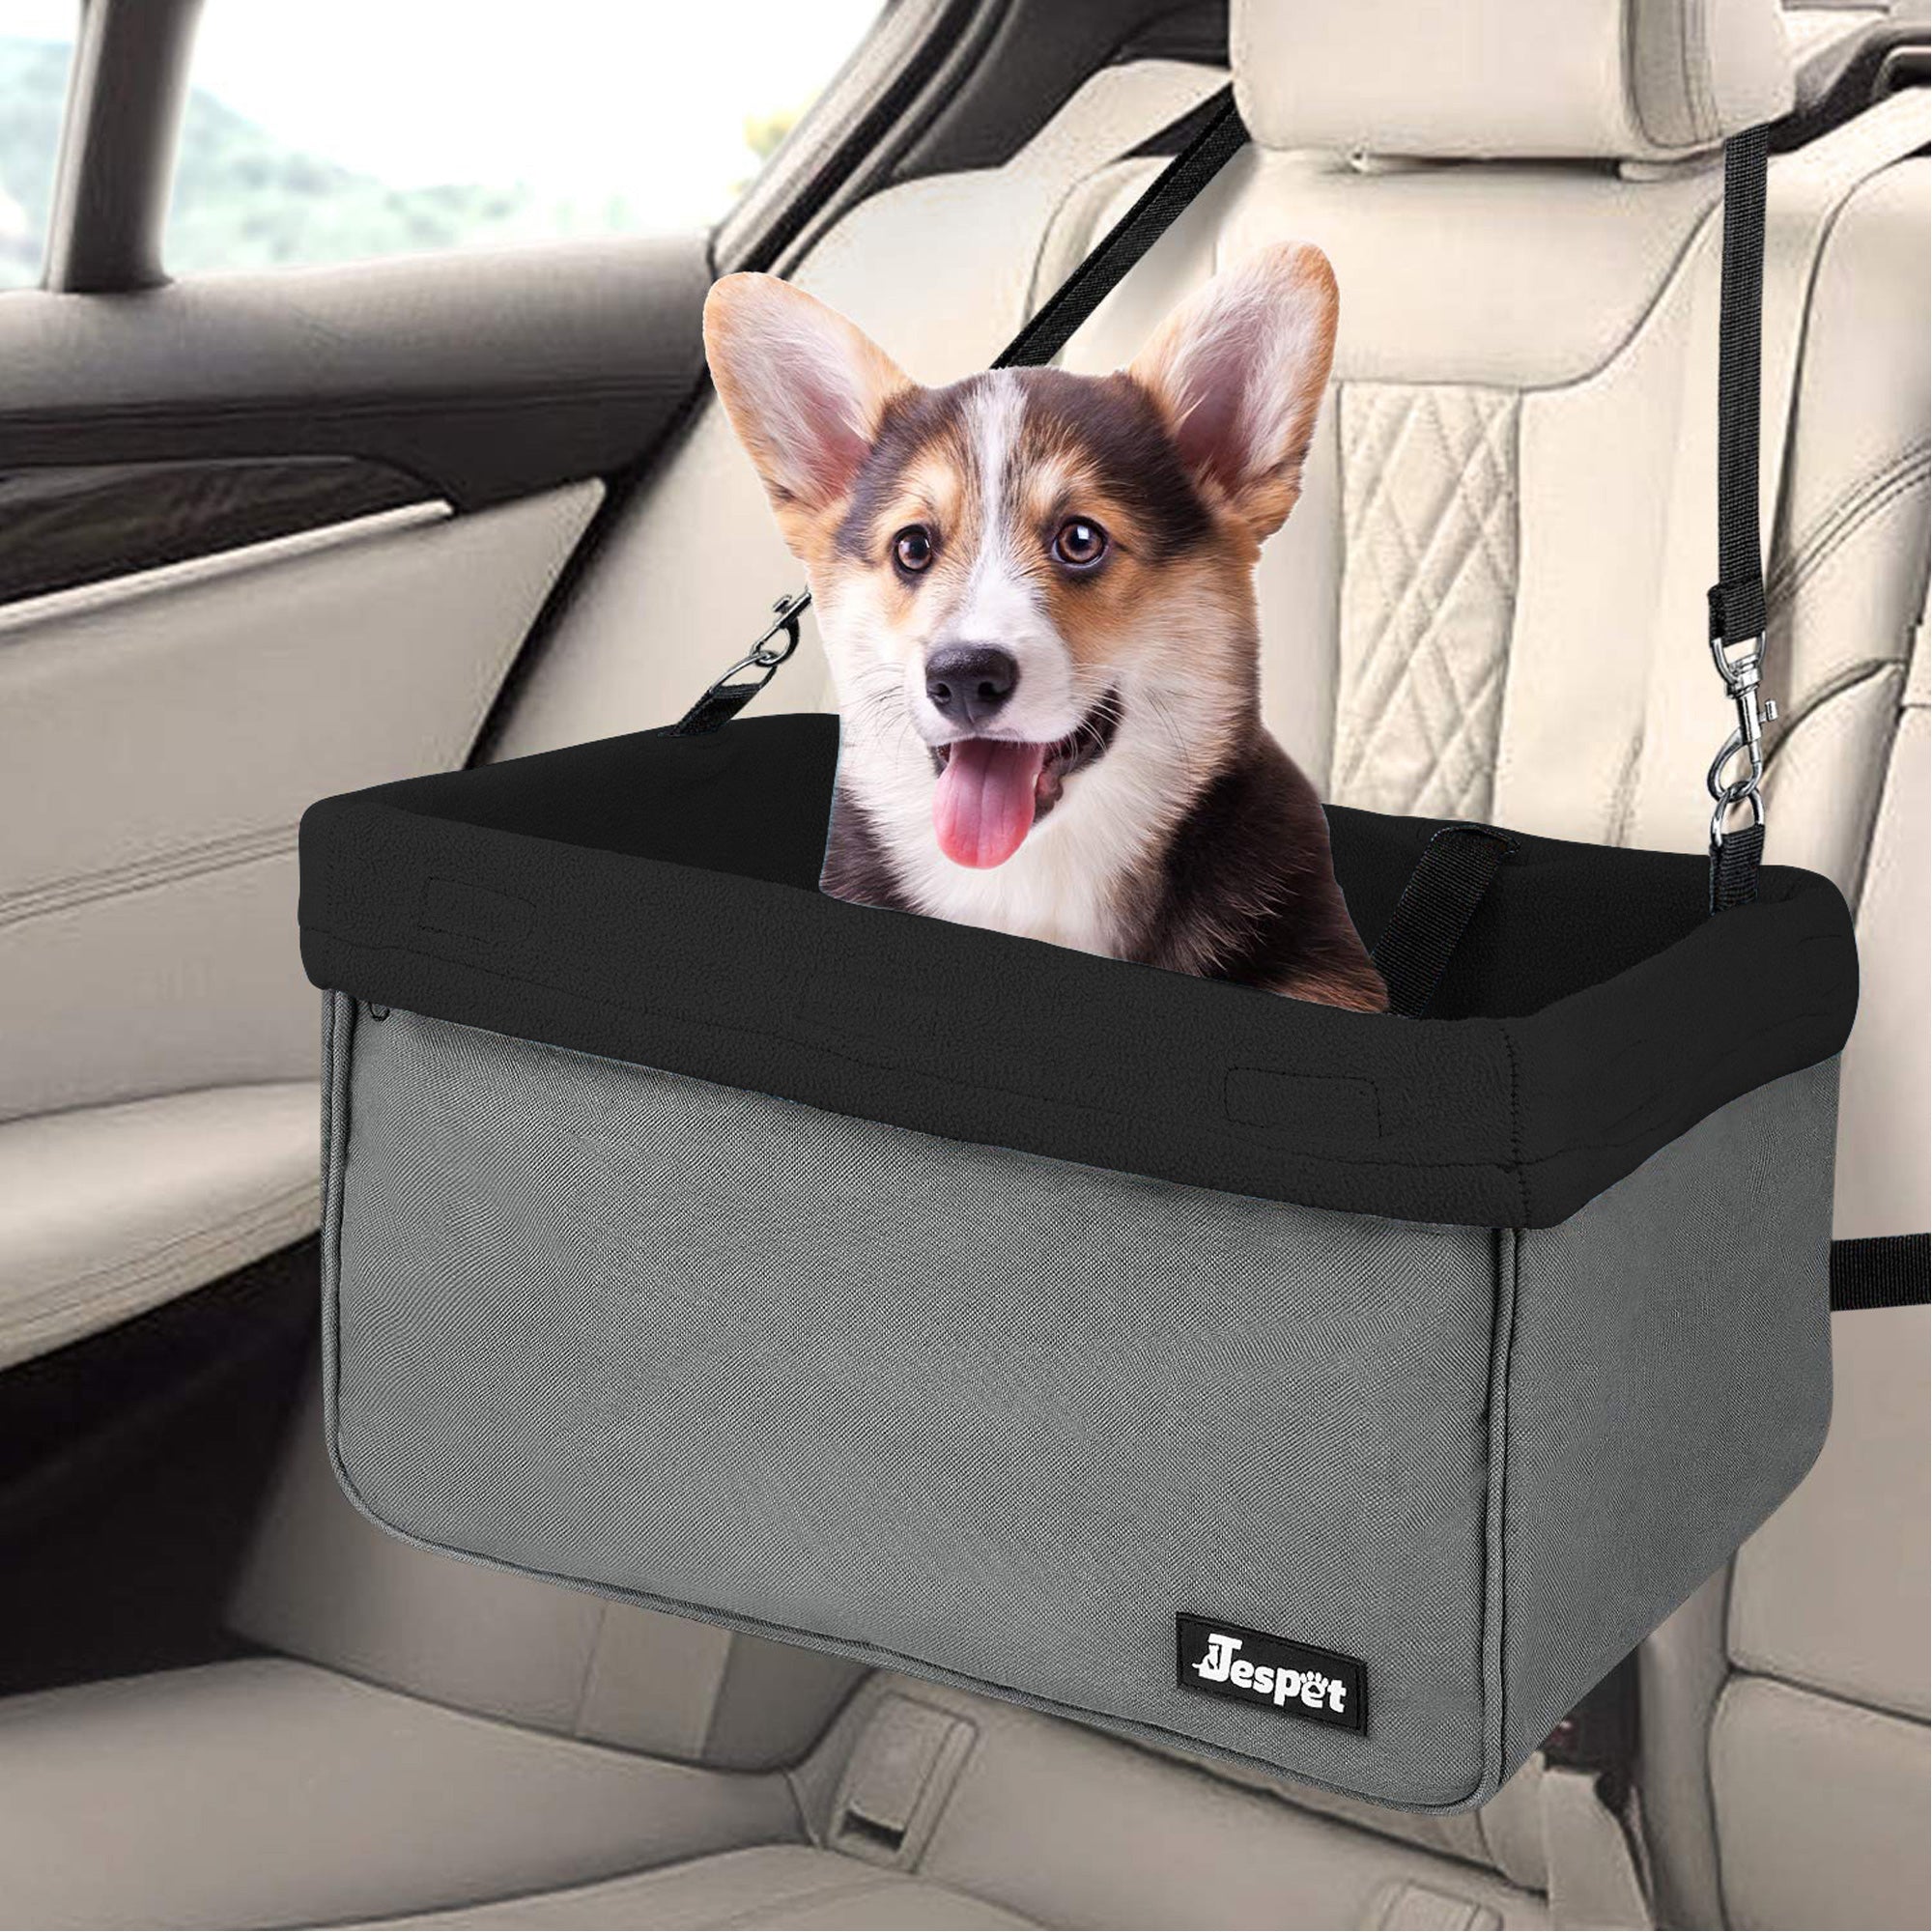 GOOPAWS Pet Travel Safety Booster Dog Car Seat with Seat Belt, Black